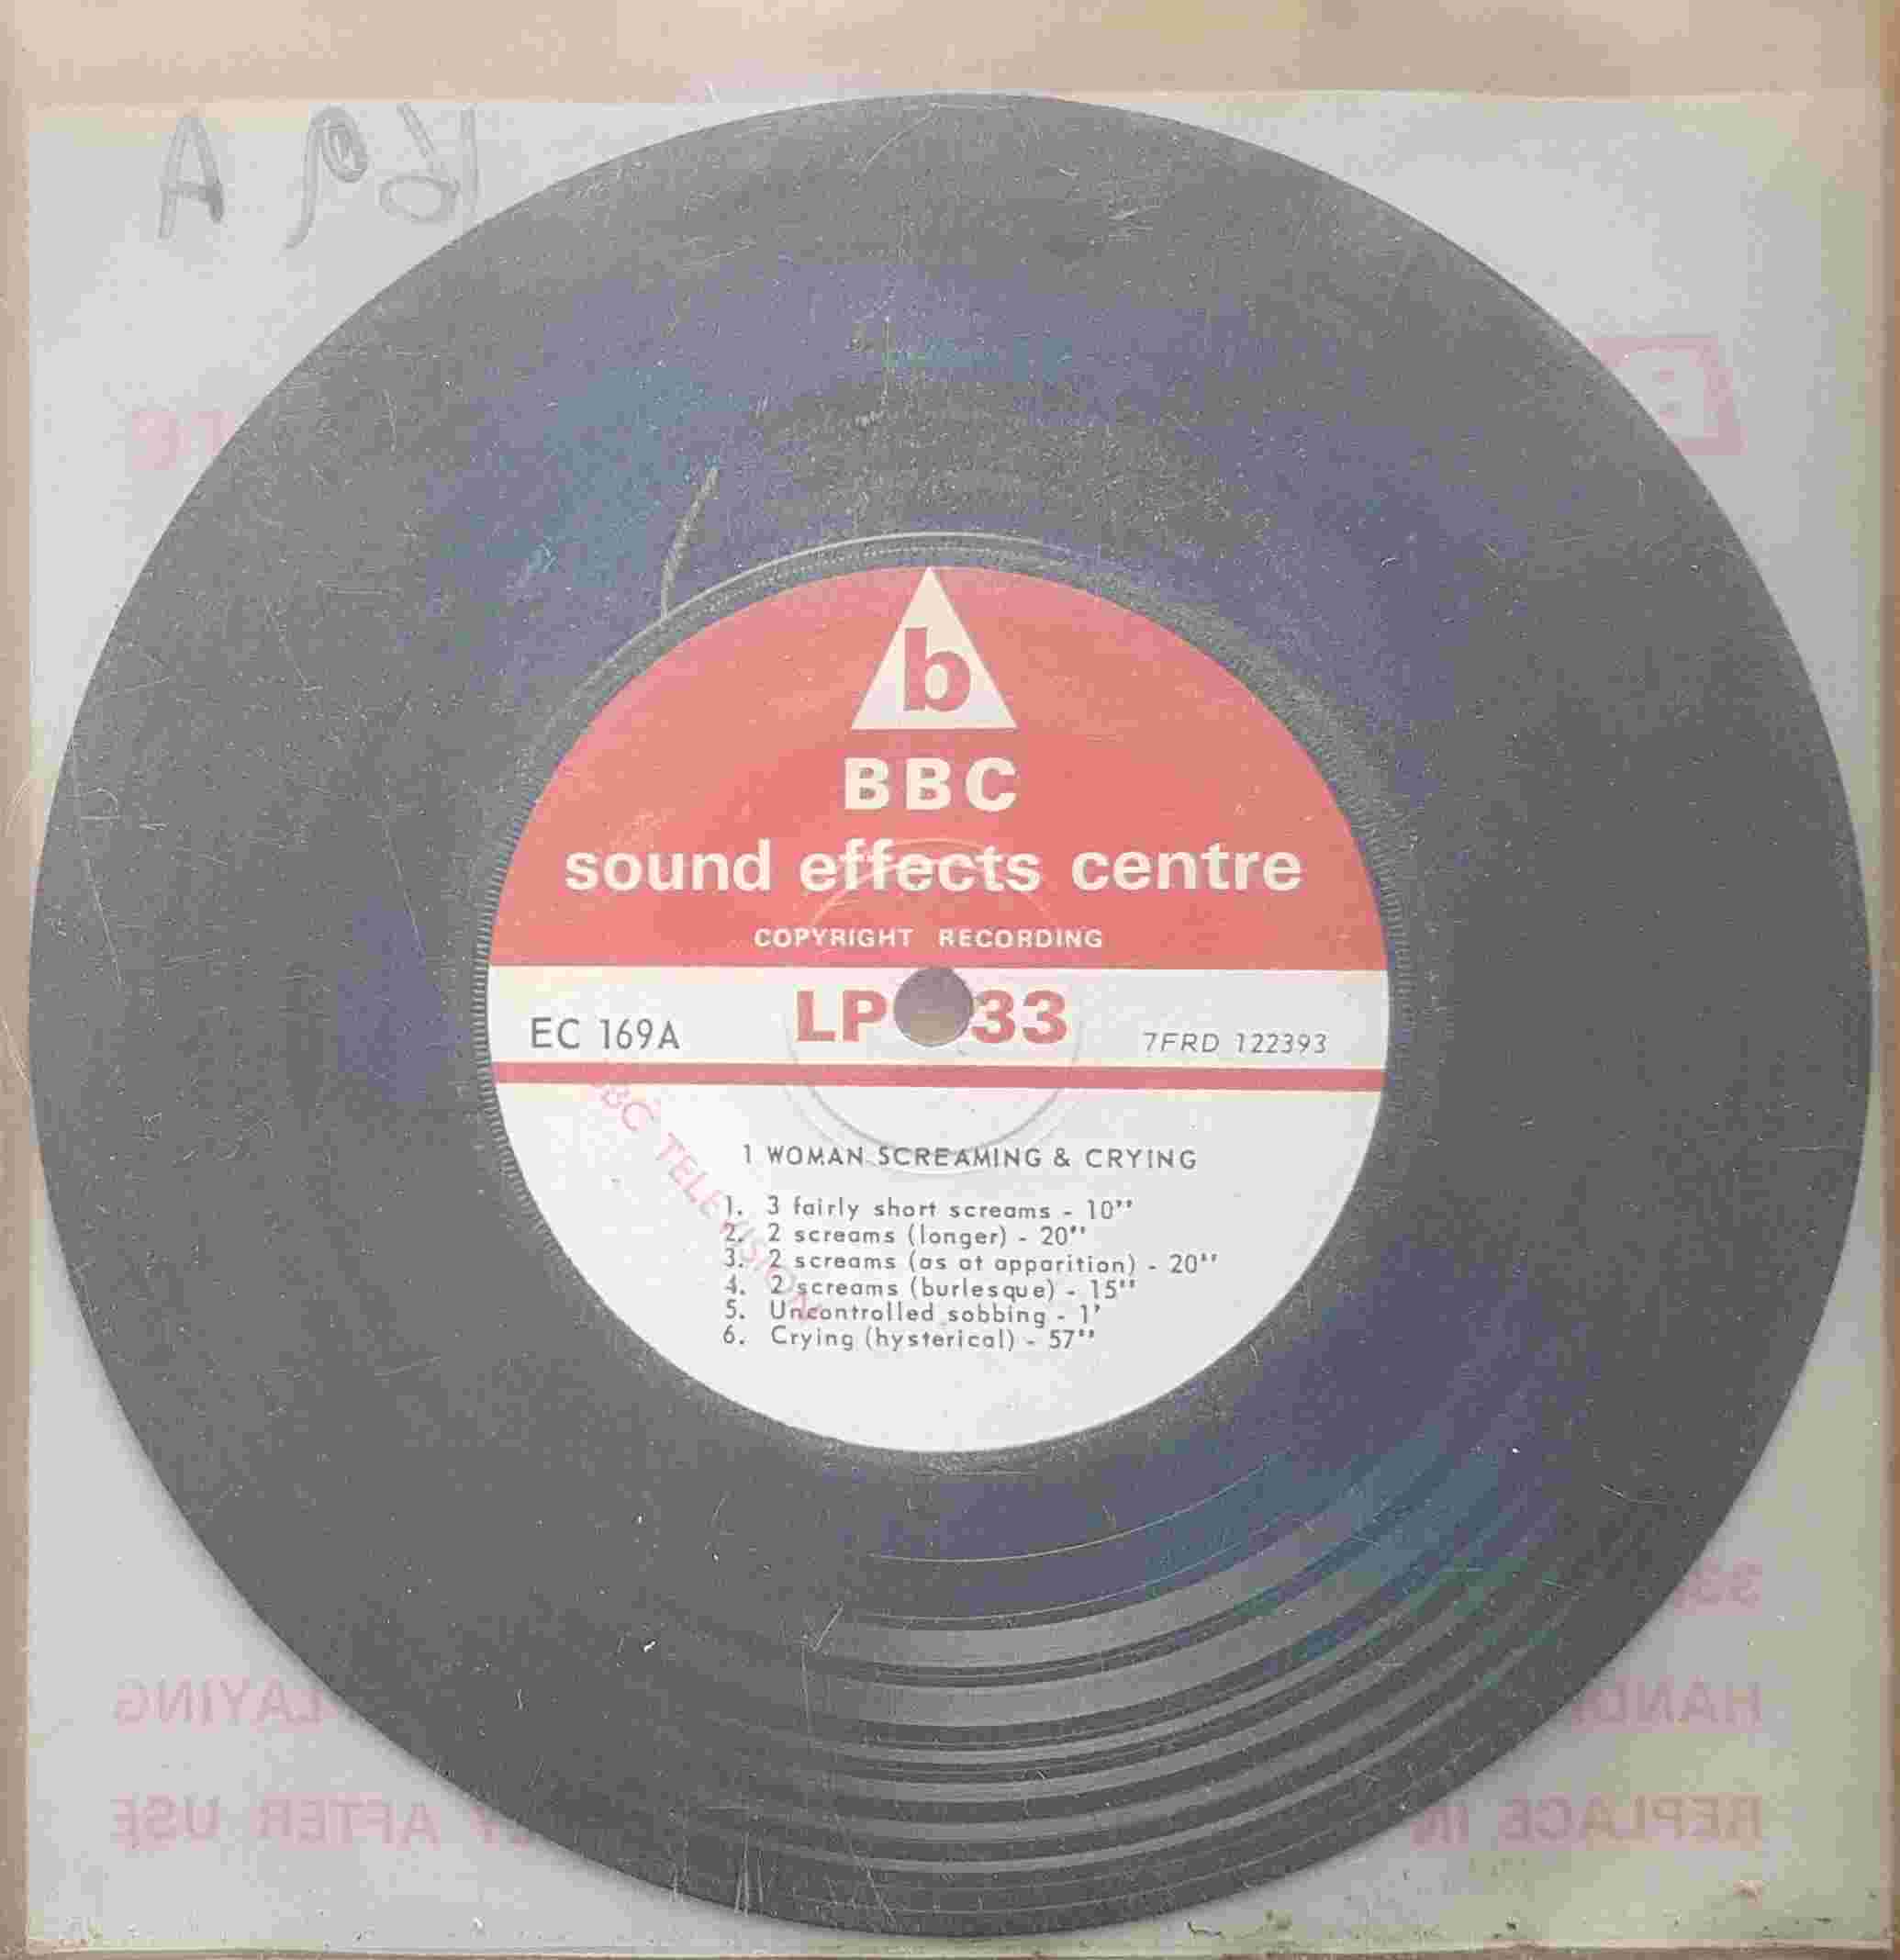 Picture of EC 169A Screams by artist Not registered from the BBC records and Tapes library